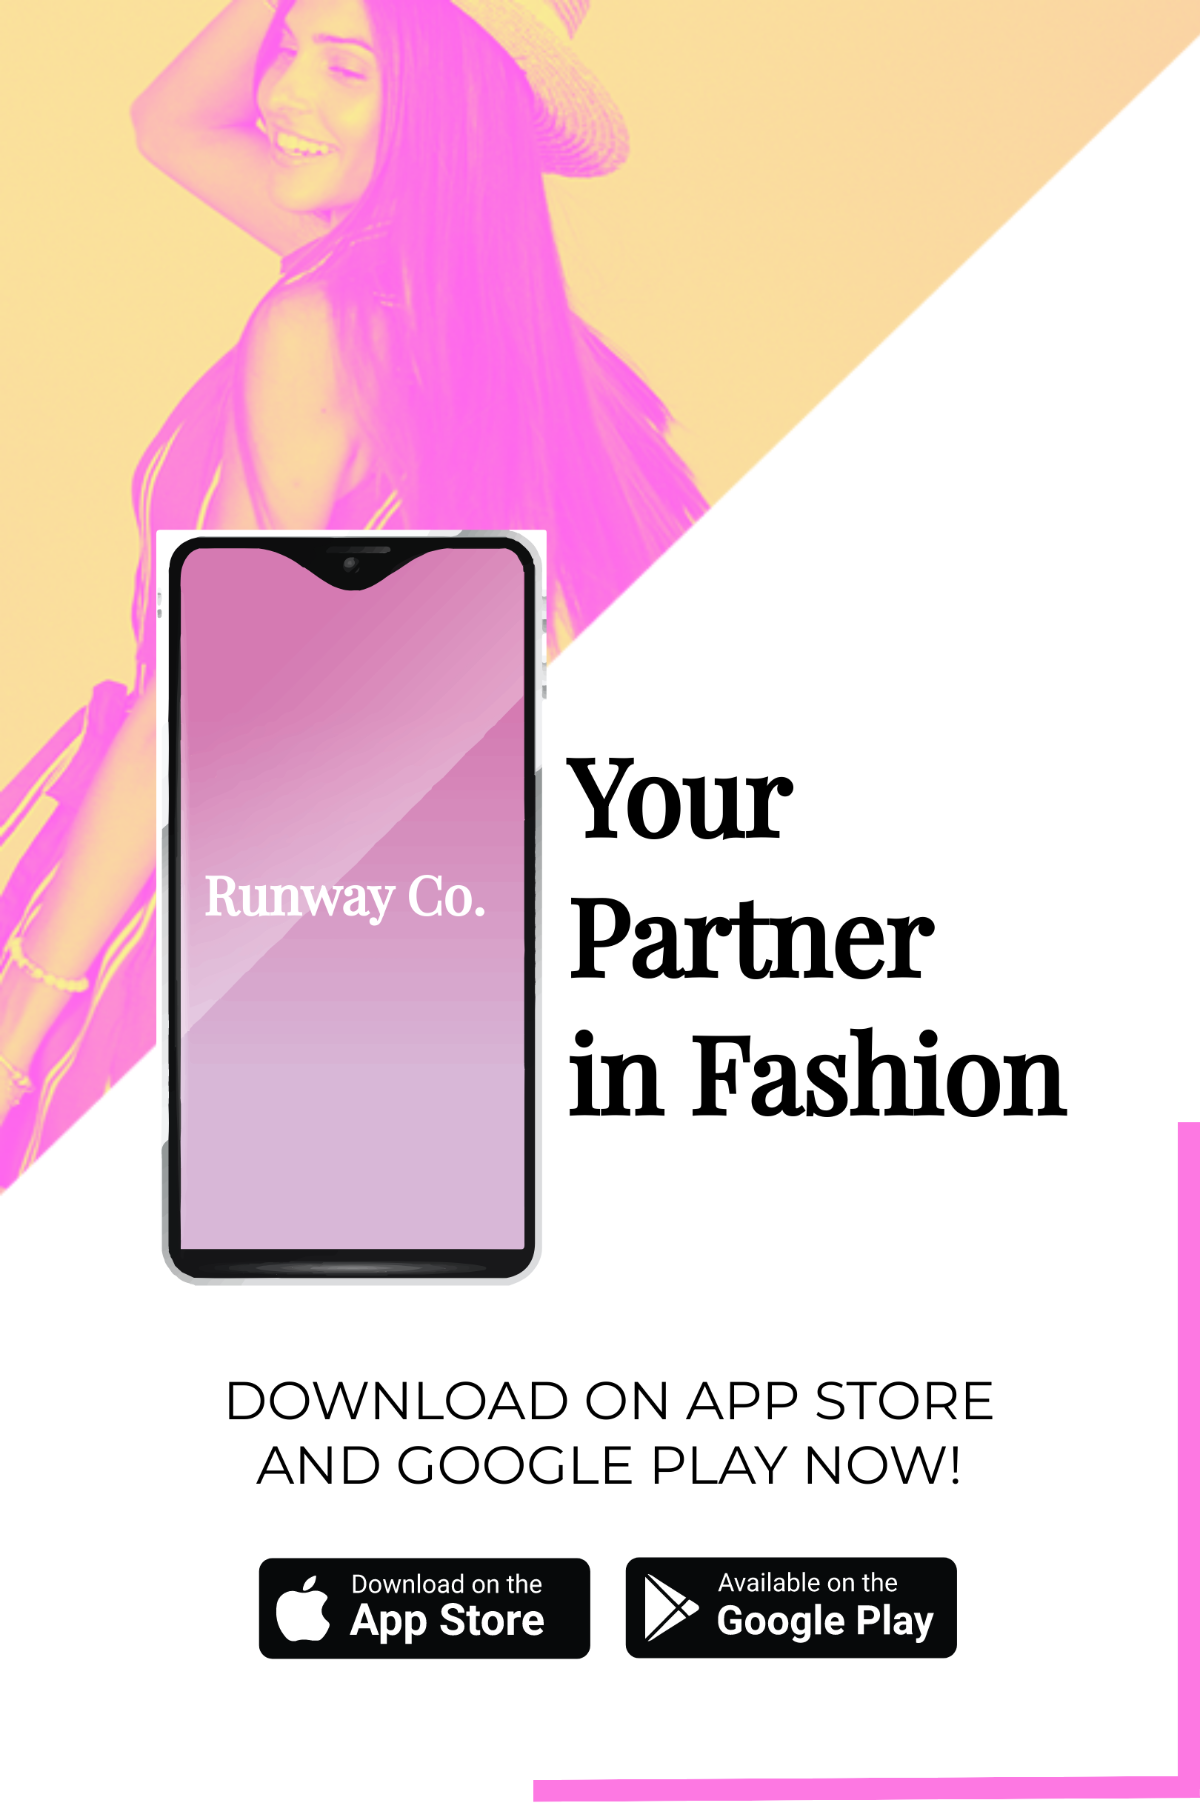 Fashion Store App Promotion Tumblr Post Template